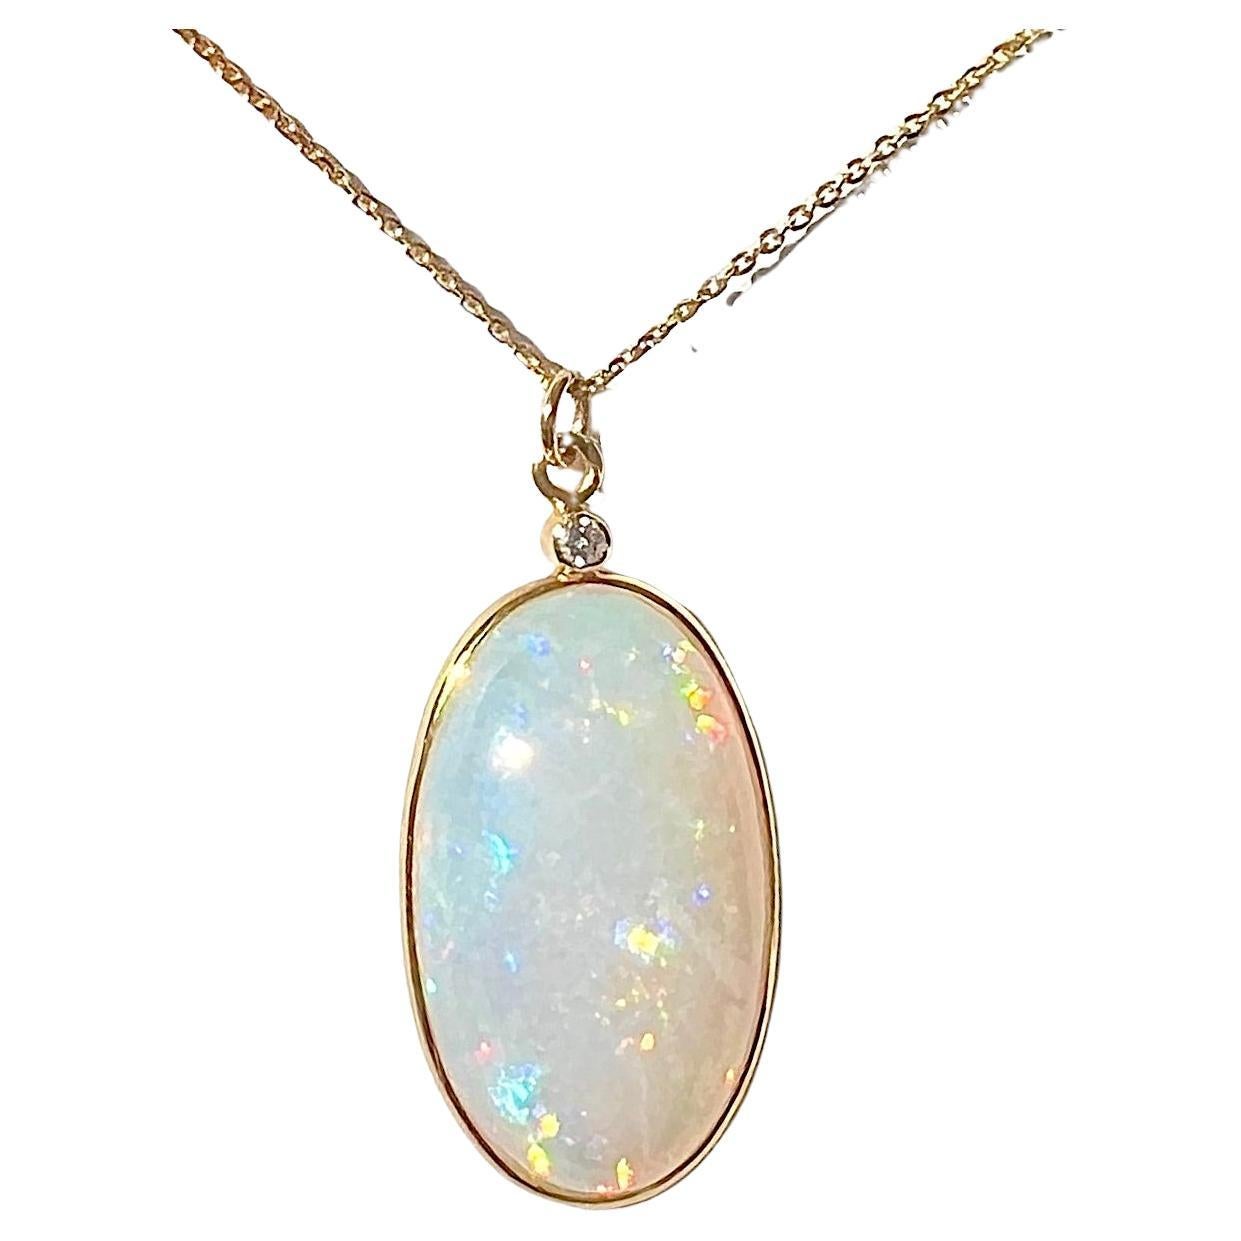 Natural Opal (16.5carat) Bezel, Diamond Accent Necklace in 18K Solid Yellow Gold